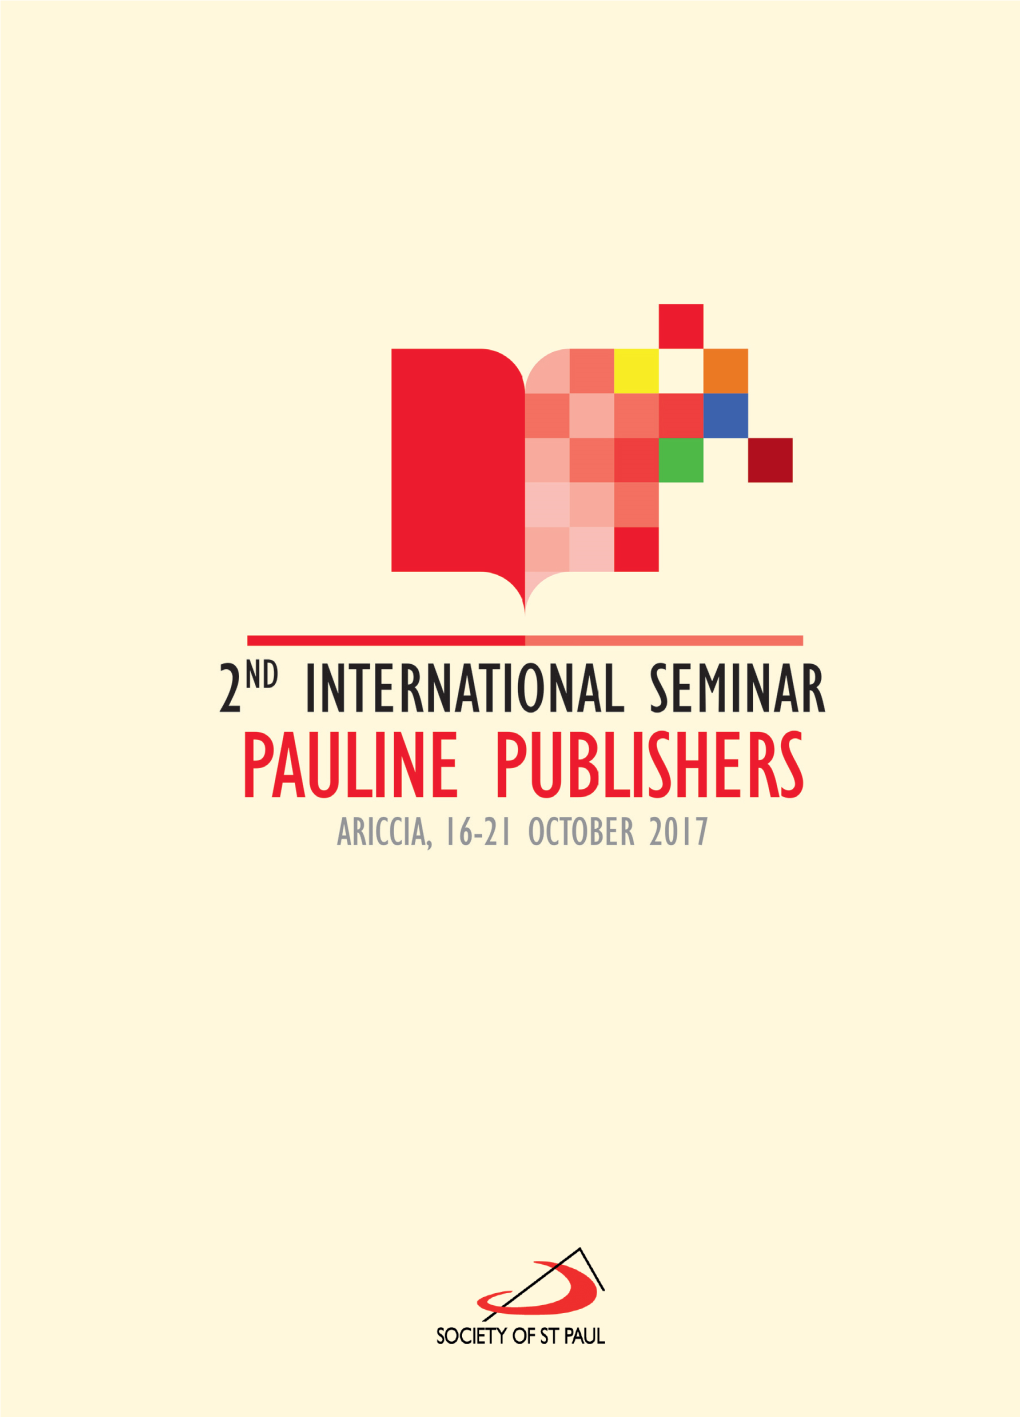 Acts of the 2Nd International Seminar of Pauline Publishers Ariccia, 16-21 October 2017